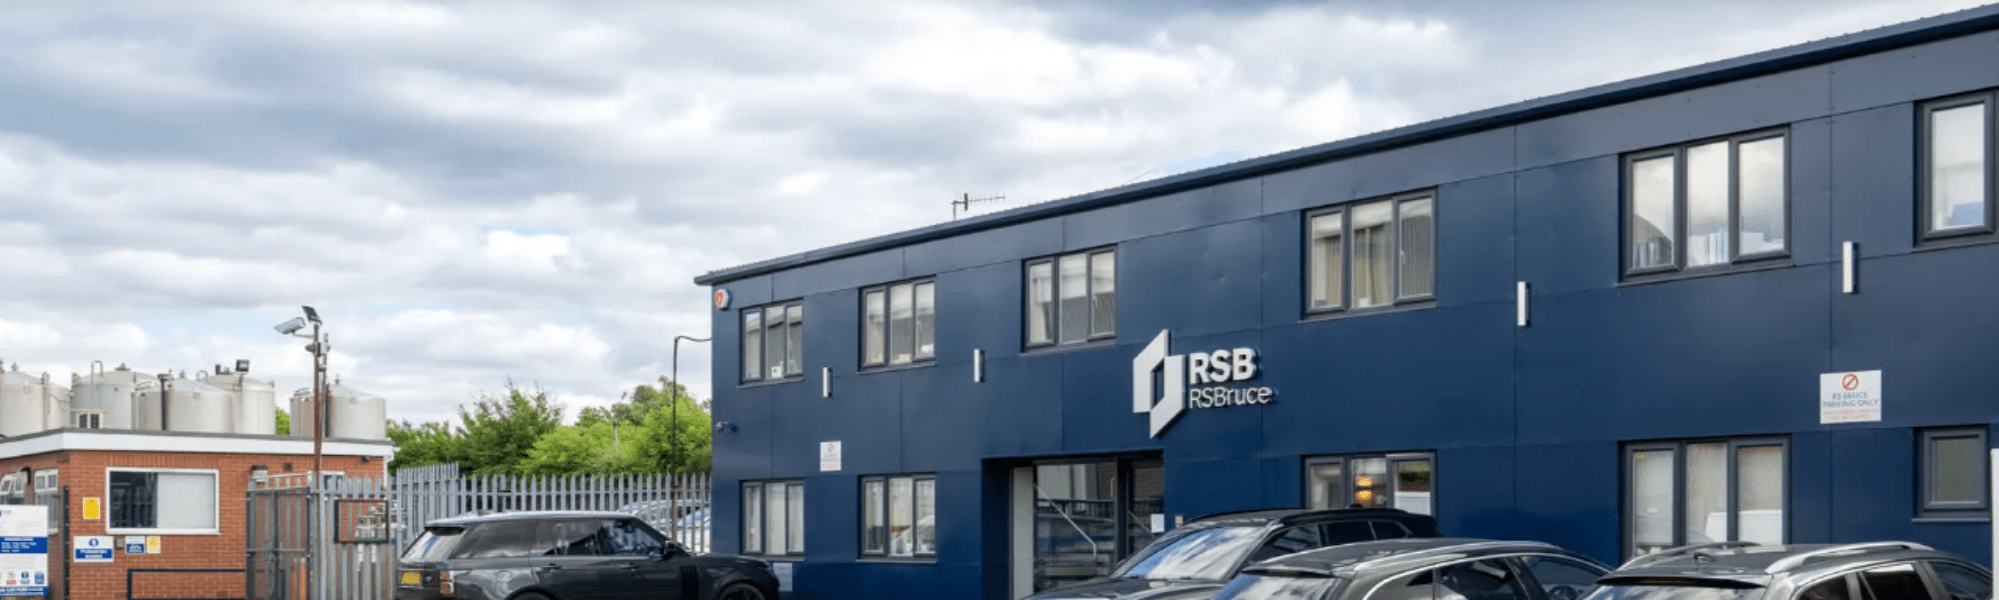 Sharp Consultancy collaborates with RSBruce Metals and Machinery Ltd